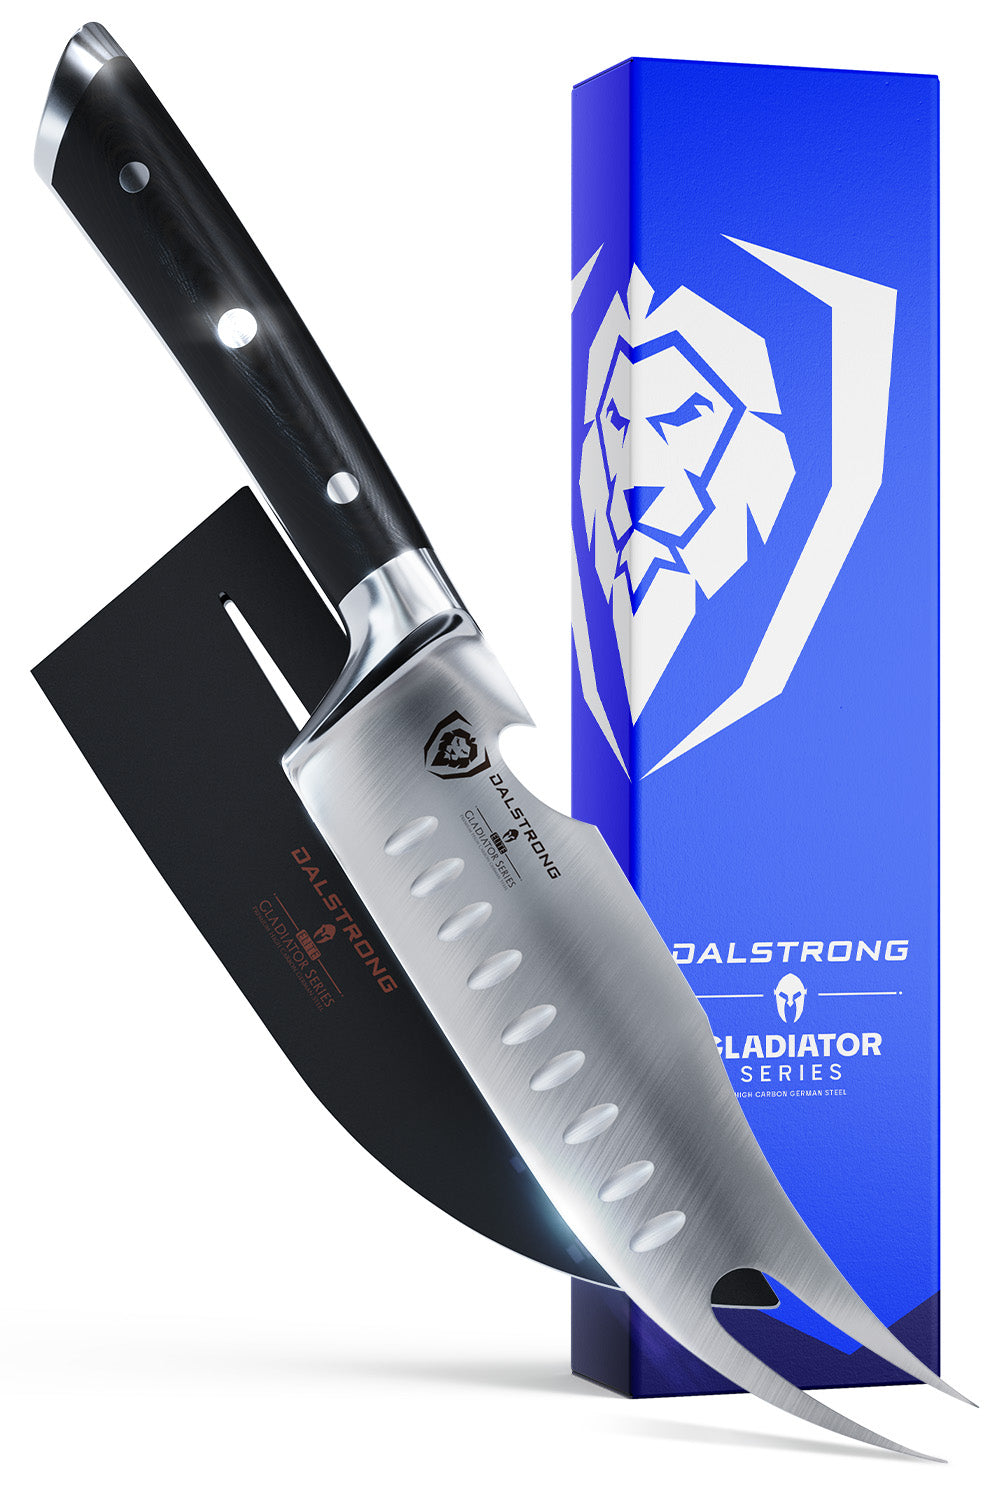 BBQ Pitmaster & Meat Knife 6.5" | Gladiator Series | NSF Certified | Dalstrong ©